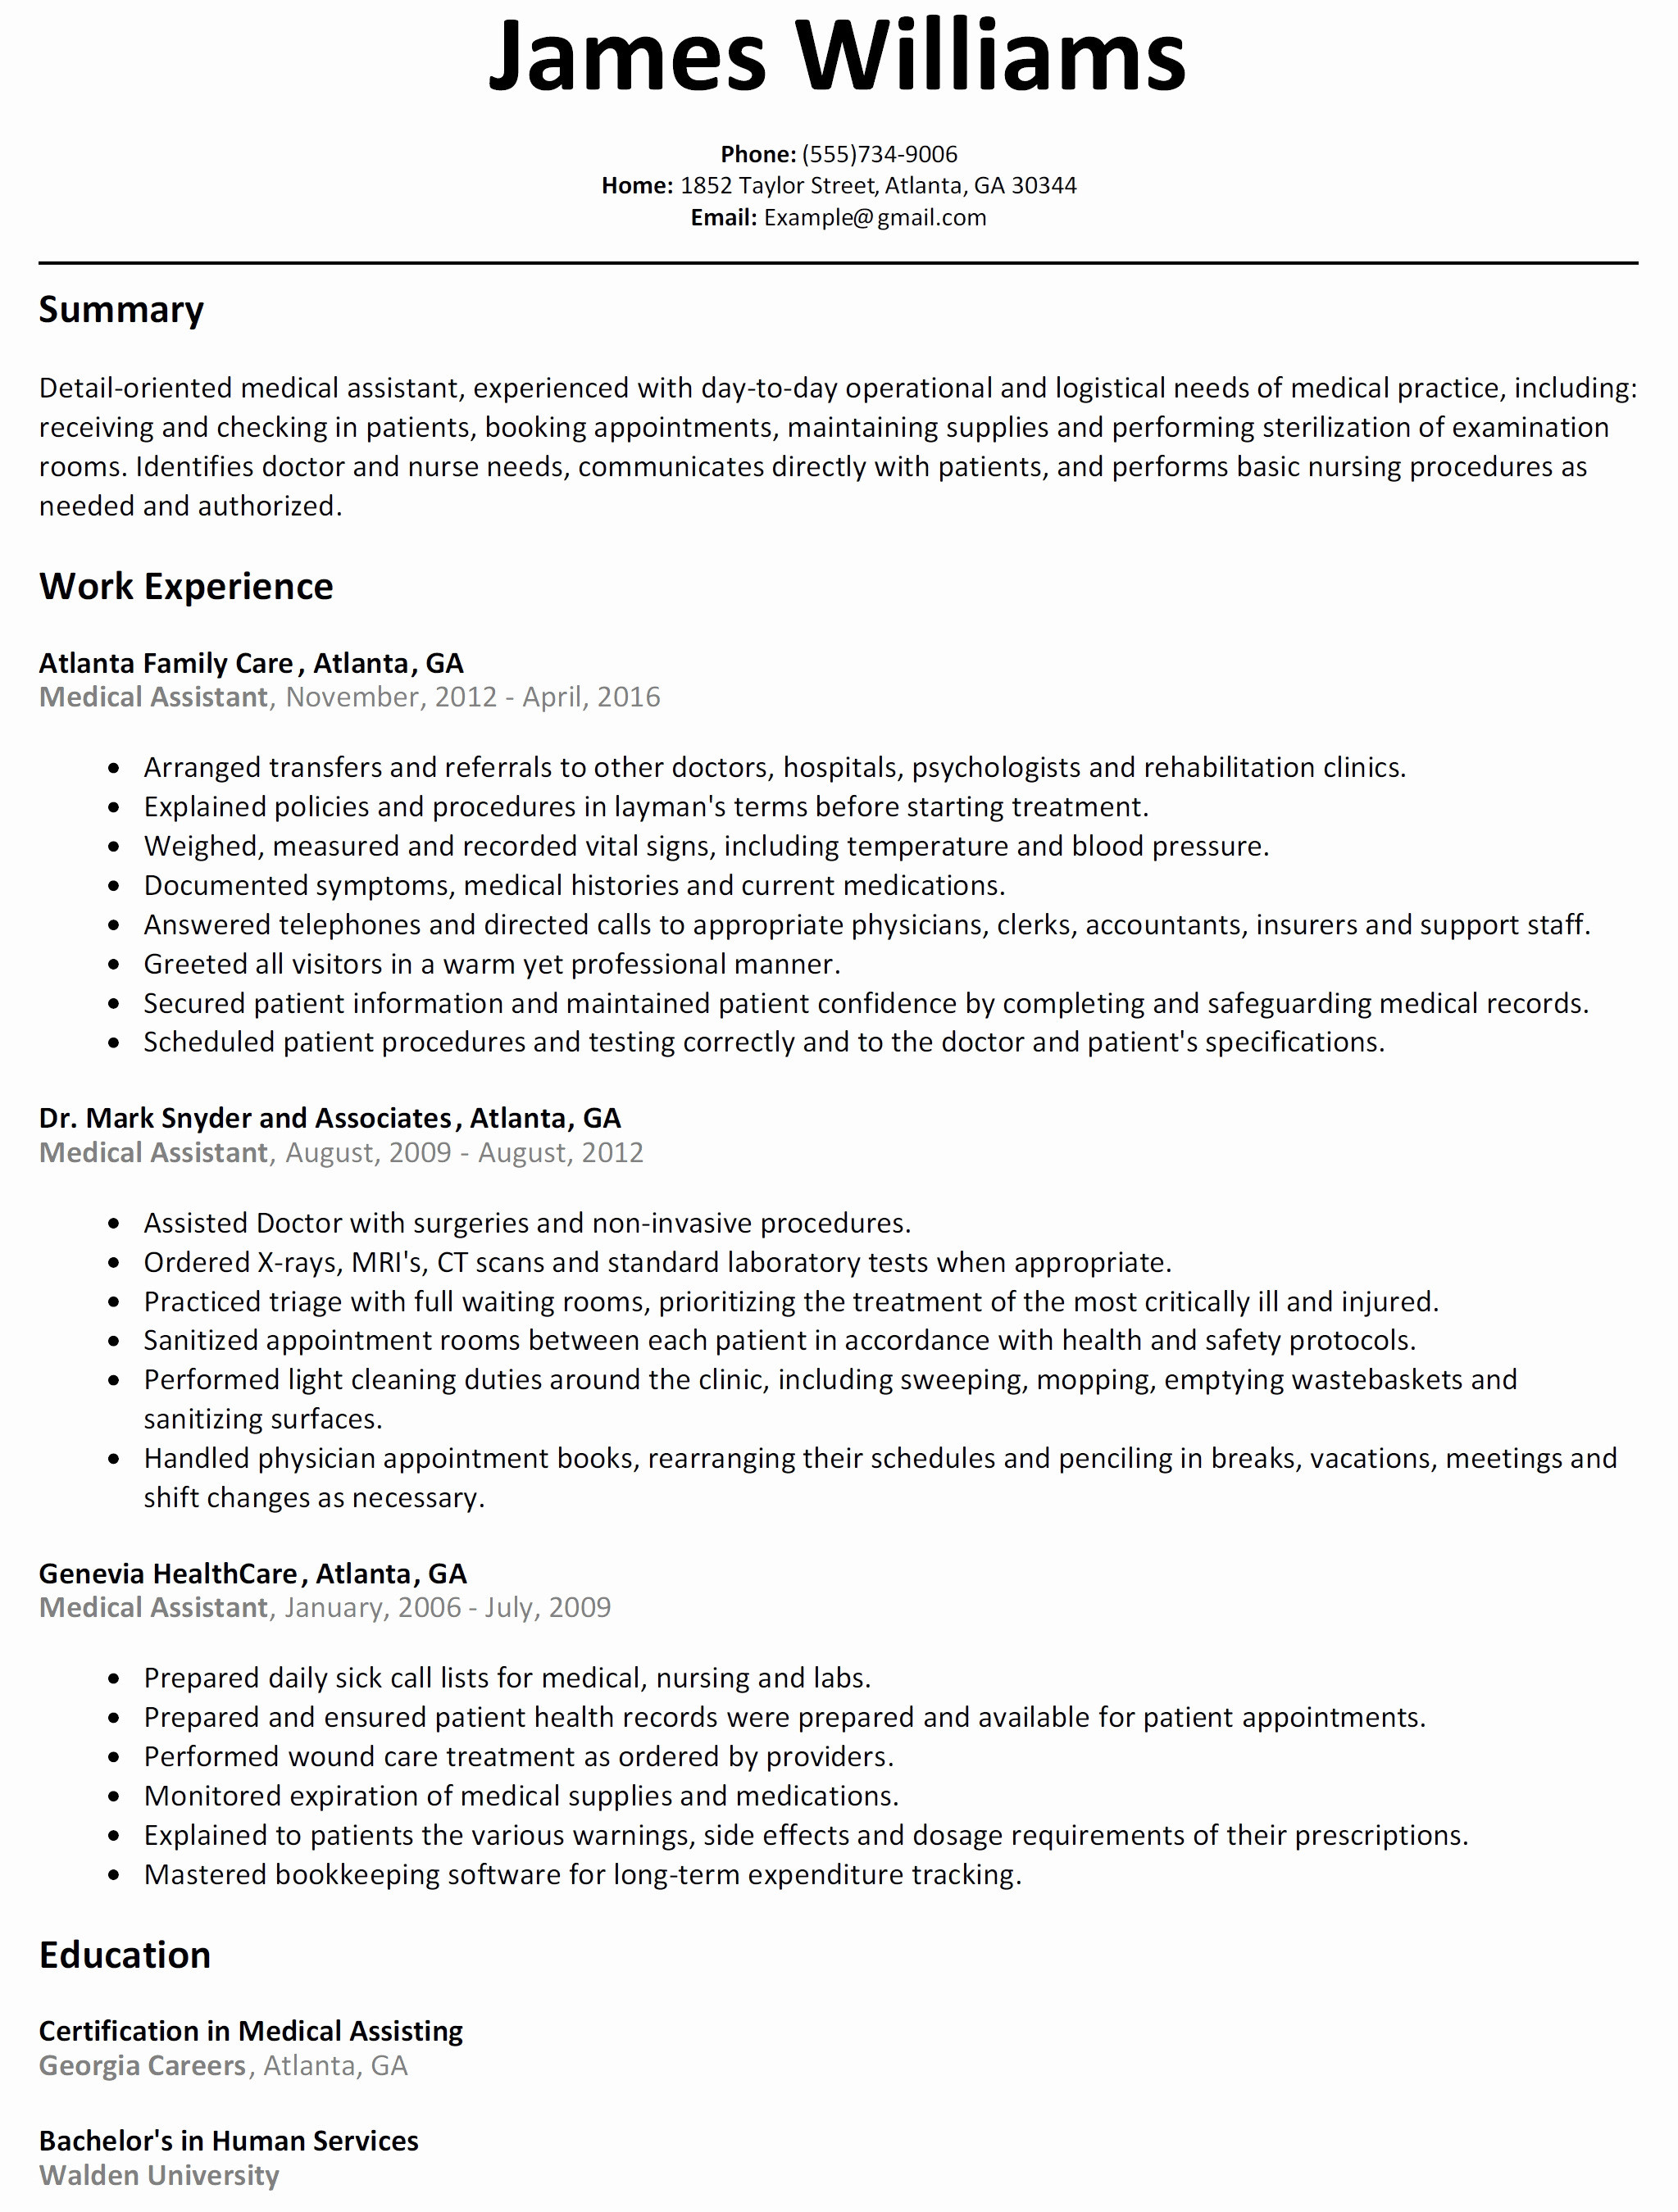 Resume Templates Free Download Free Simple Resume Format Pagemaker Templates Free Download Awesome Design Academic Resume Of Free Simple Resume Format resume templates free download|wikiresume.com